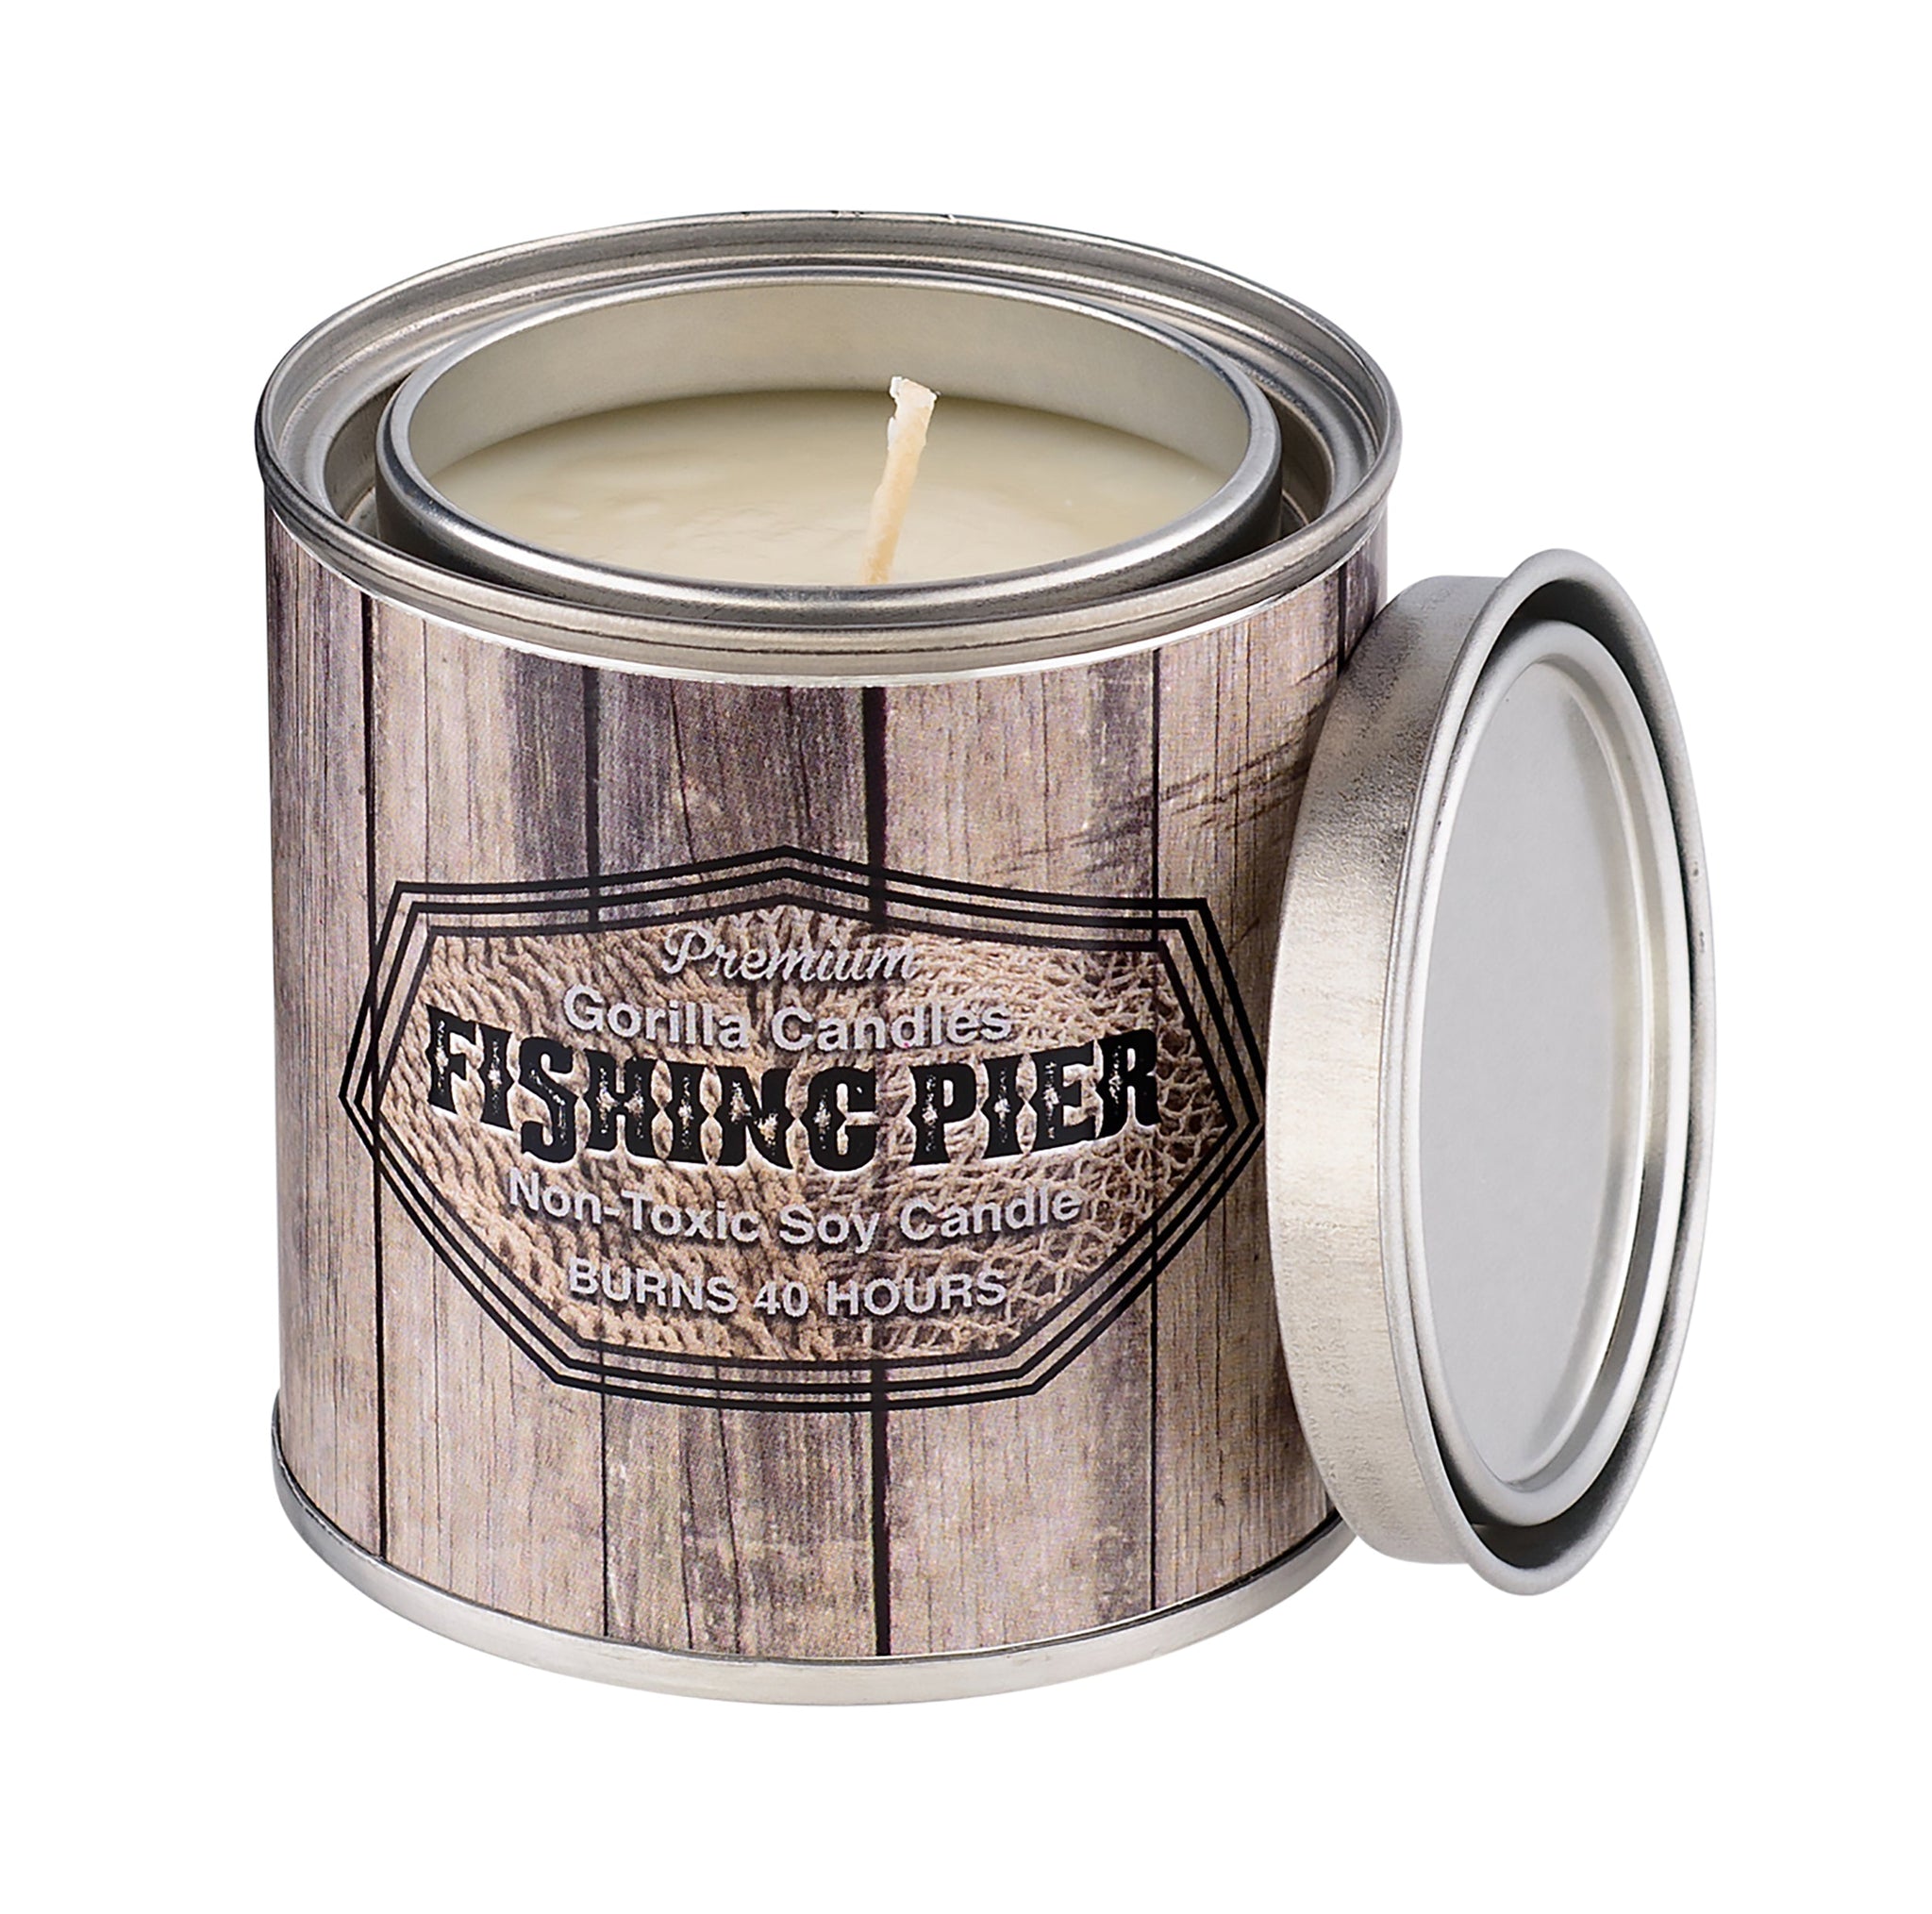 Fishing Pier by Gorilla Candles™